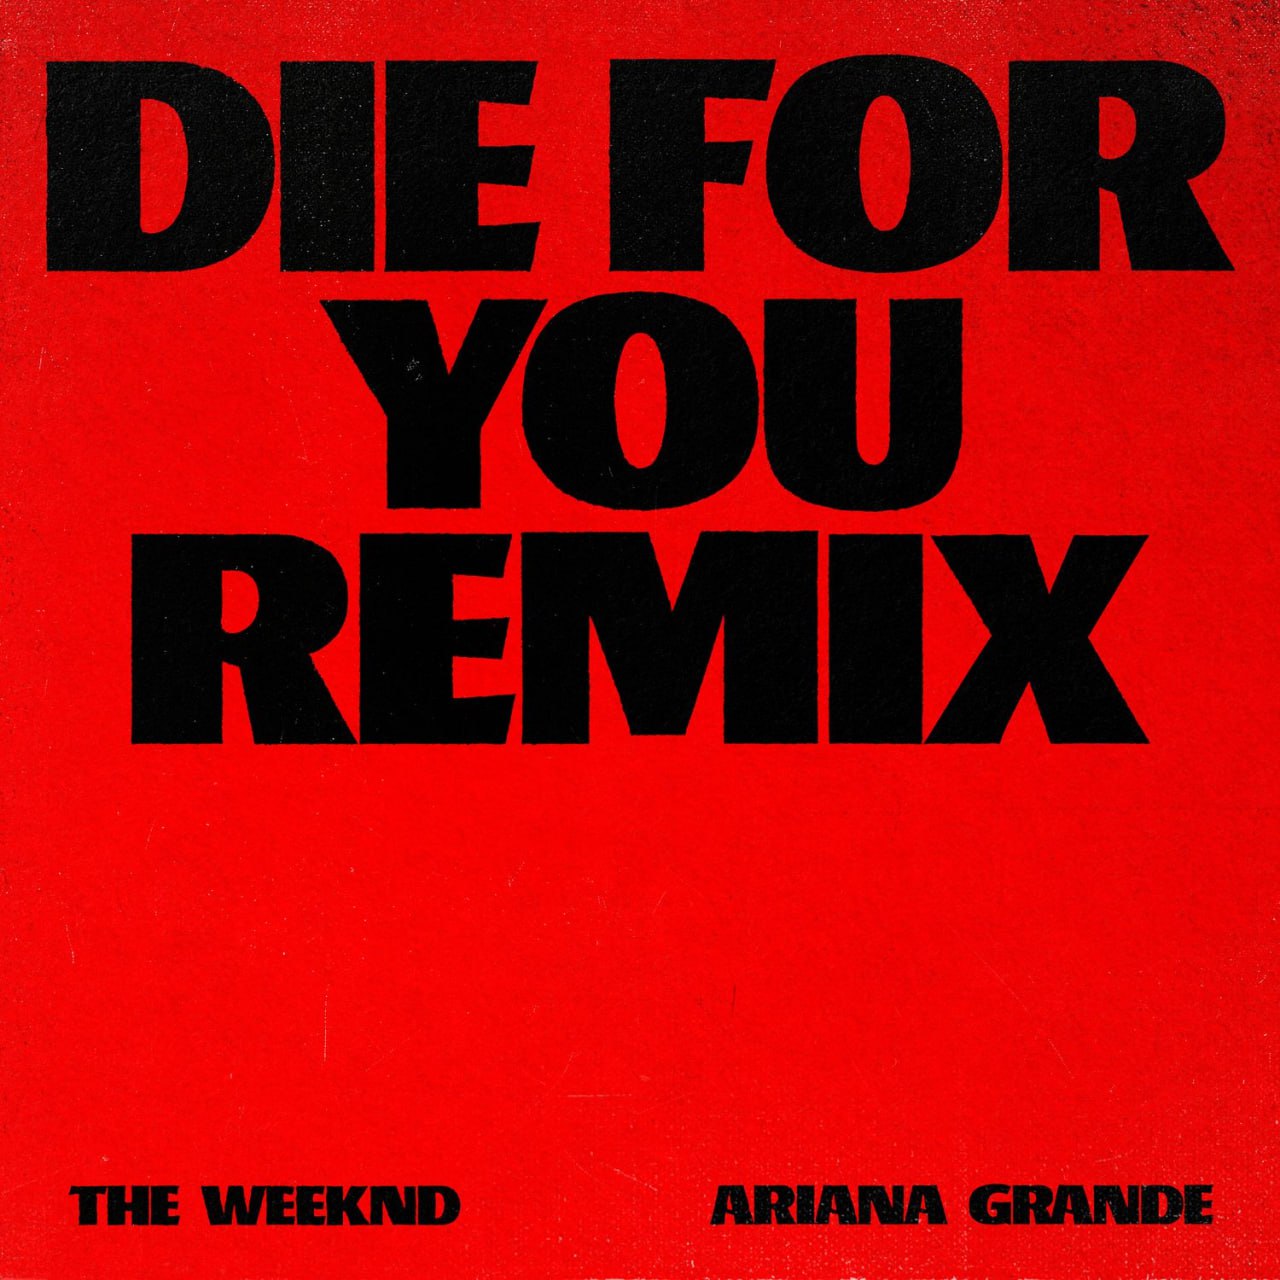 Die For You (Remix) - The Weeknd ft. Ariana Grande